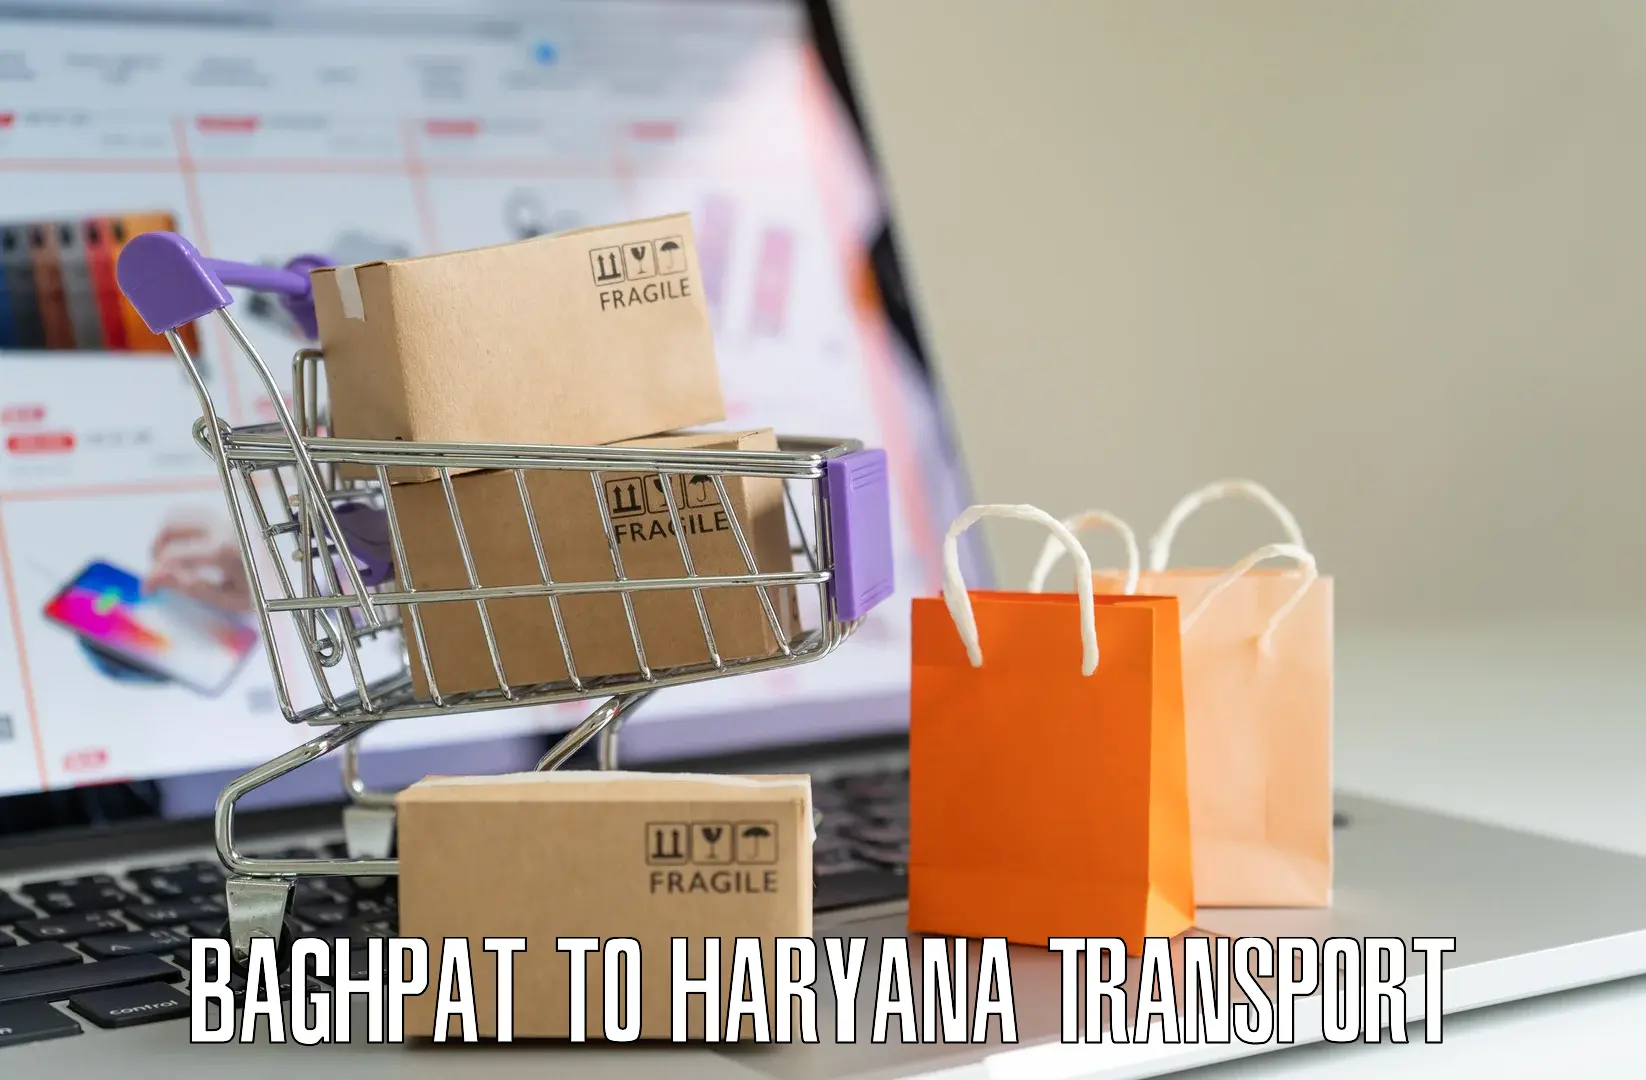 Goods delivery service Baghpat to Haryana